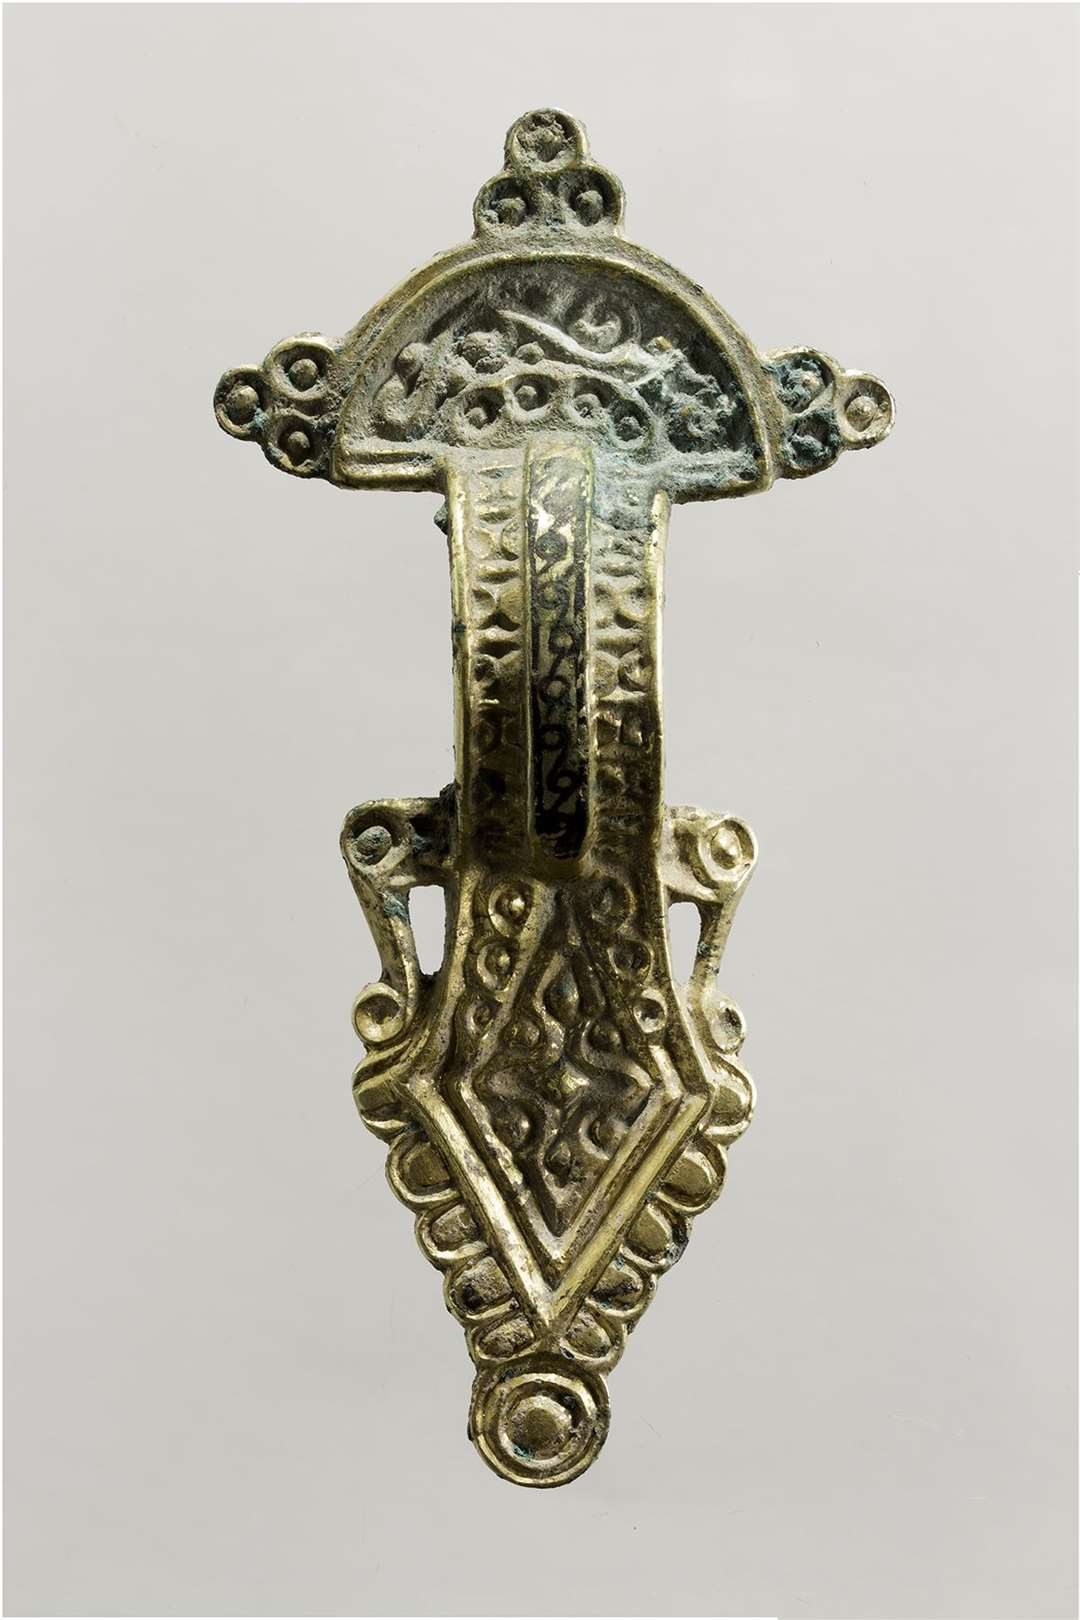 A 6th Century silver gilt brooch found at the site. Image from Pre-Construct Archaeology